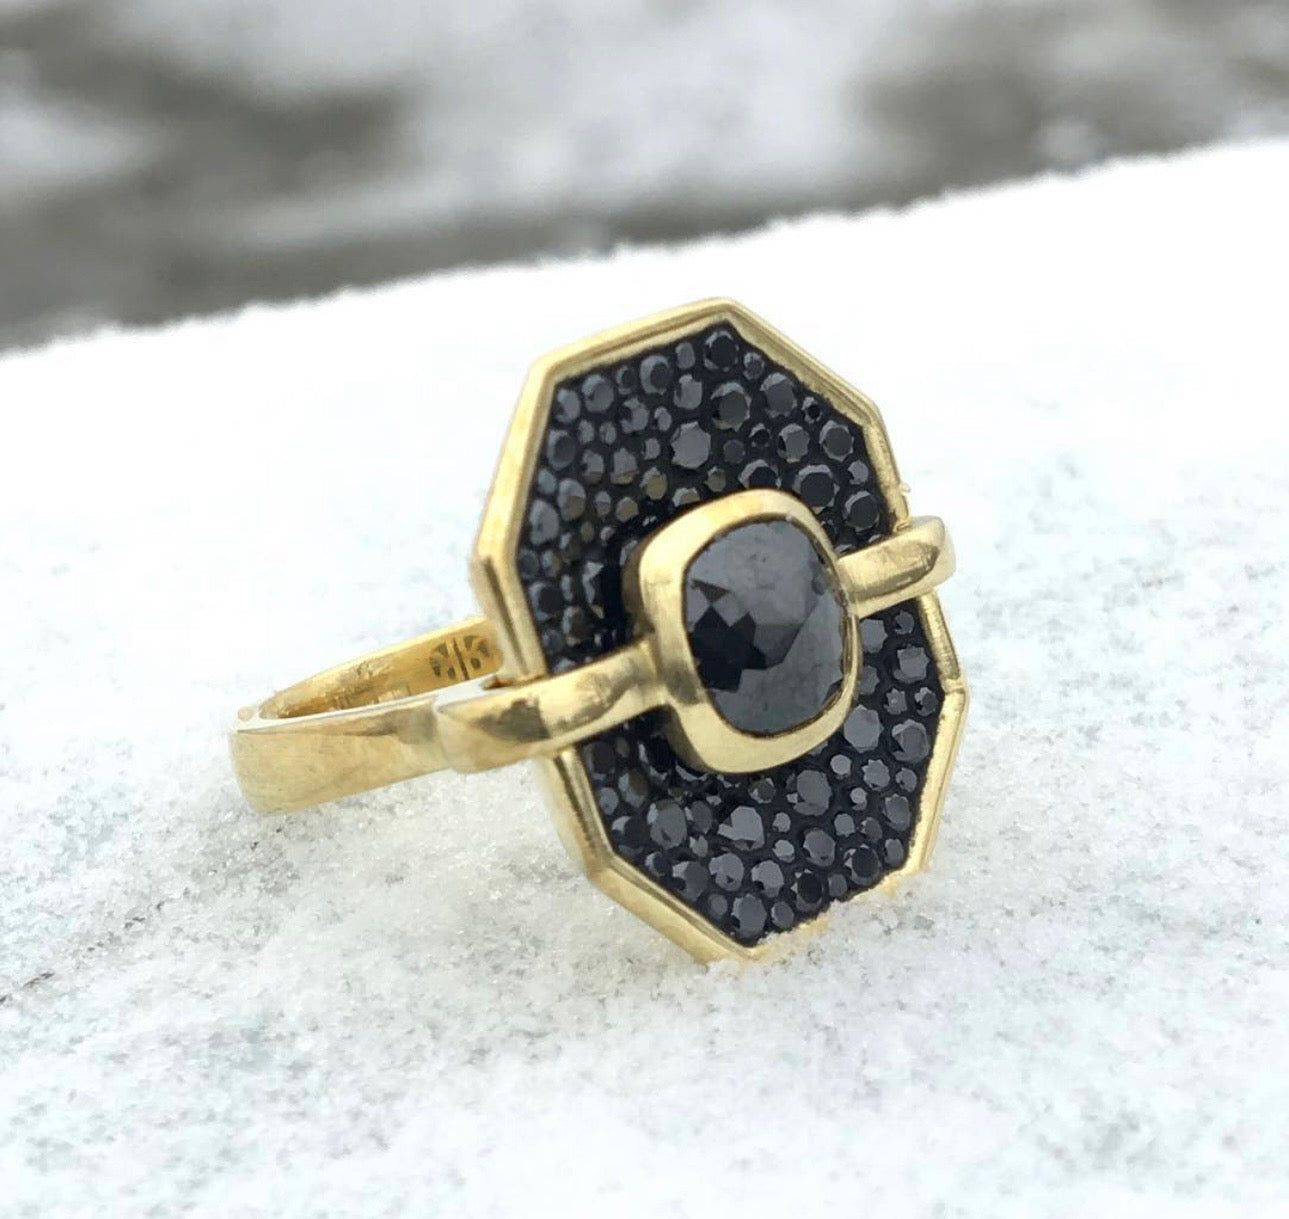 Black Diamond Opus Ring available at Talisman Collection Fine Jewelers in El Dorado Hills, CA and online. Specs: The stunning Black Opus Octagon Diamond Ring is encrusted with 3.00 cts of black diamonds set in 18k yellow gold.